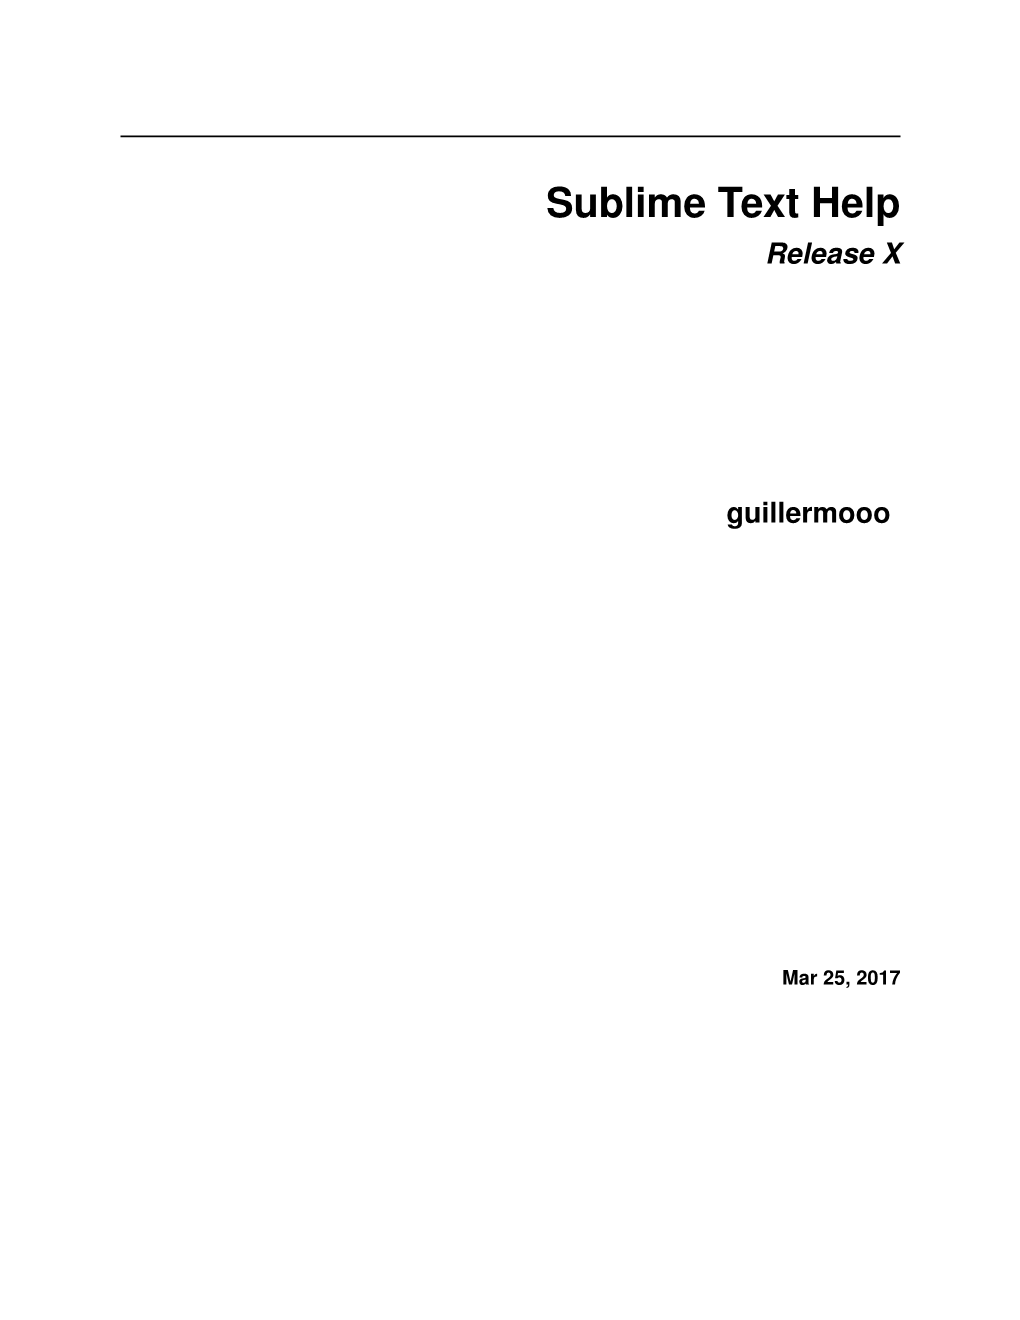 Sublime Text Help Release X